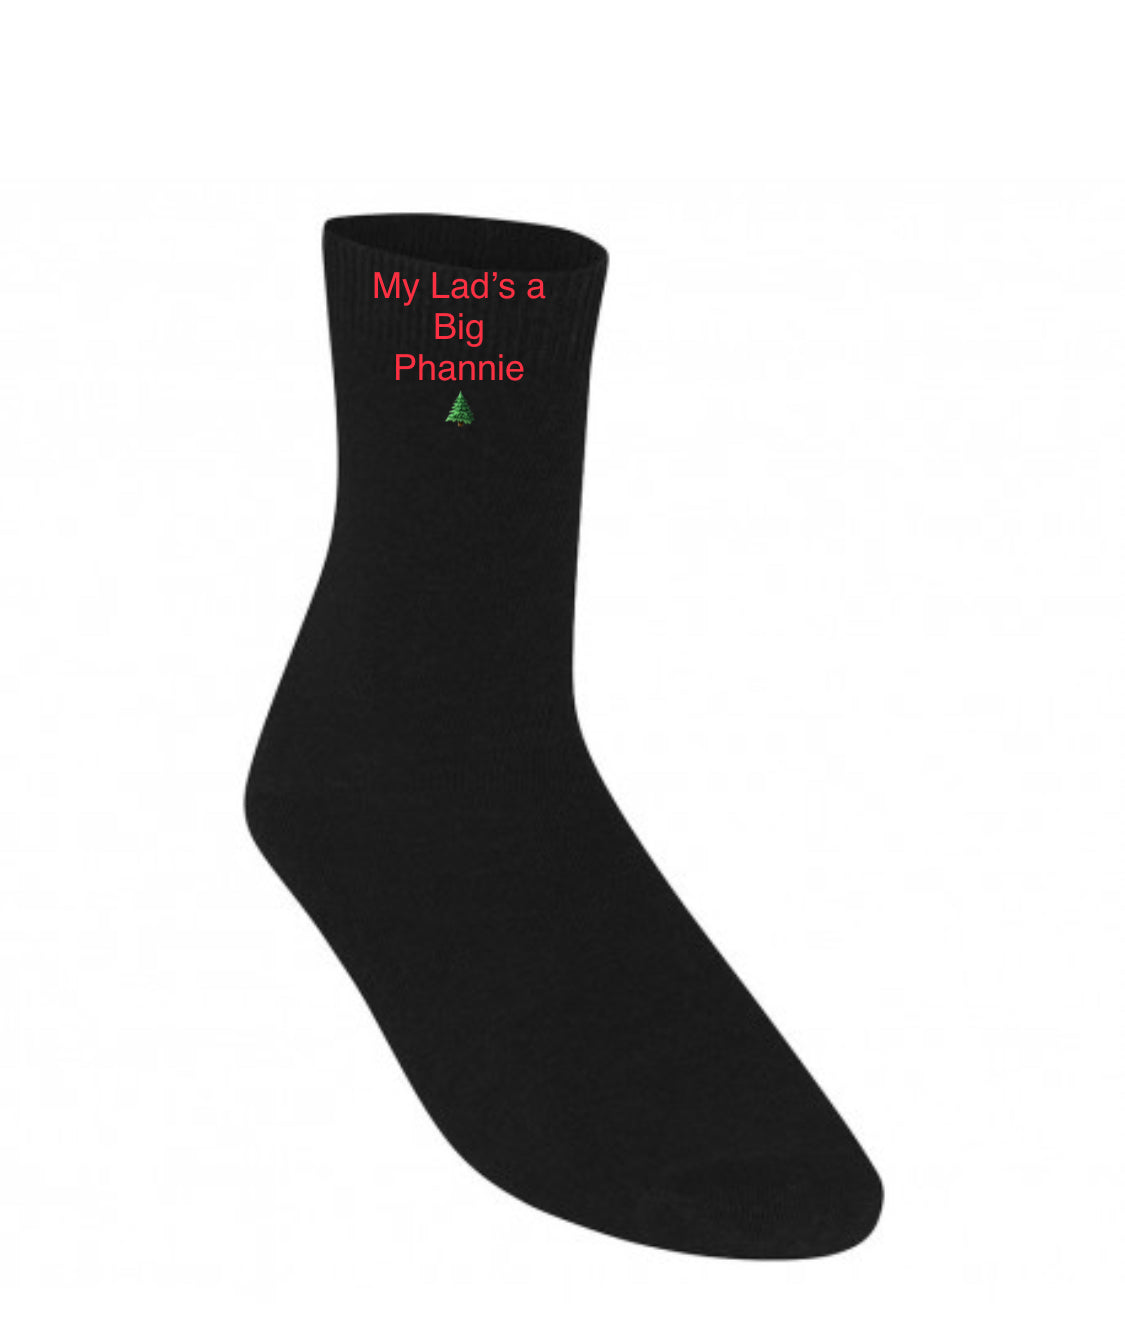 My Dad's (or Lad’s) a Big Phannie Christmas Socks - Limited Edition! - Order Today also a great GIFT